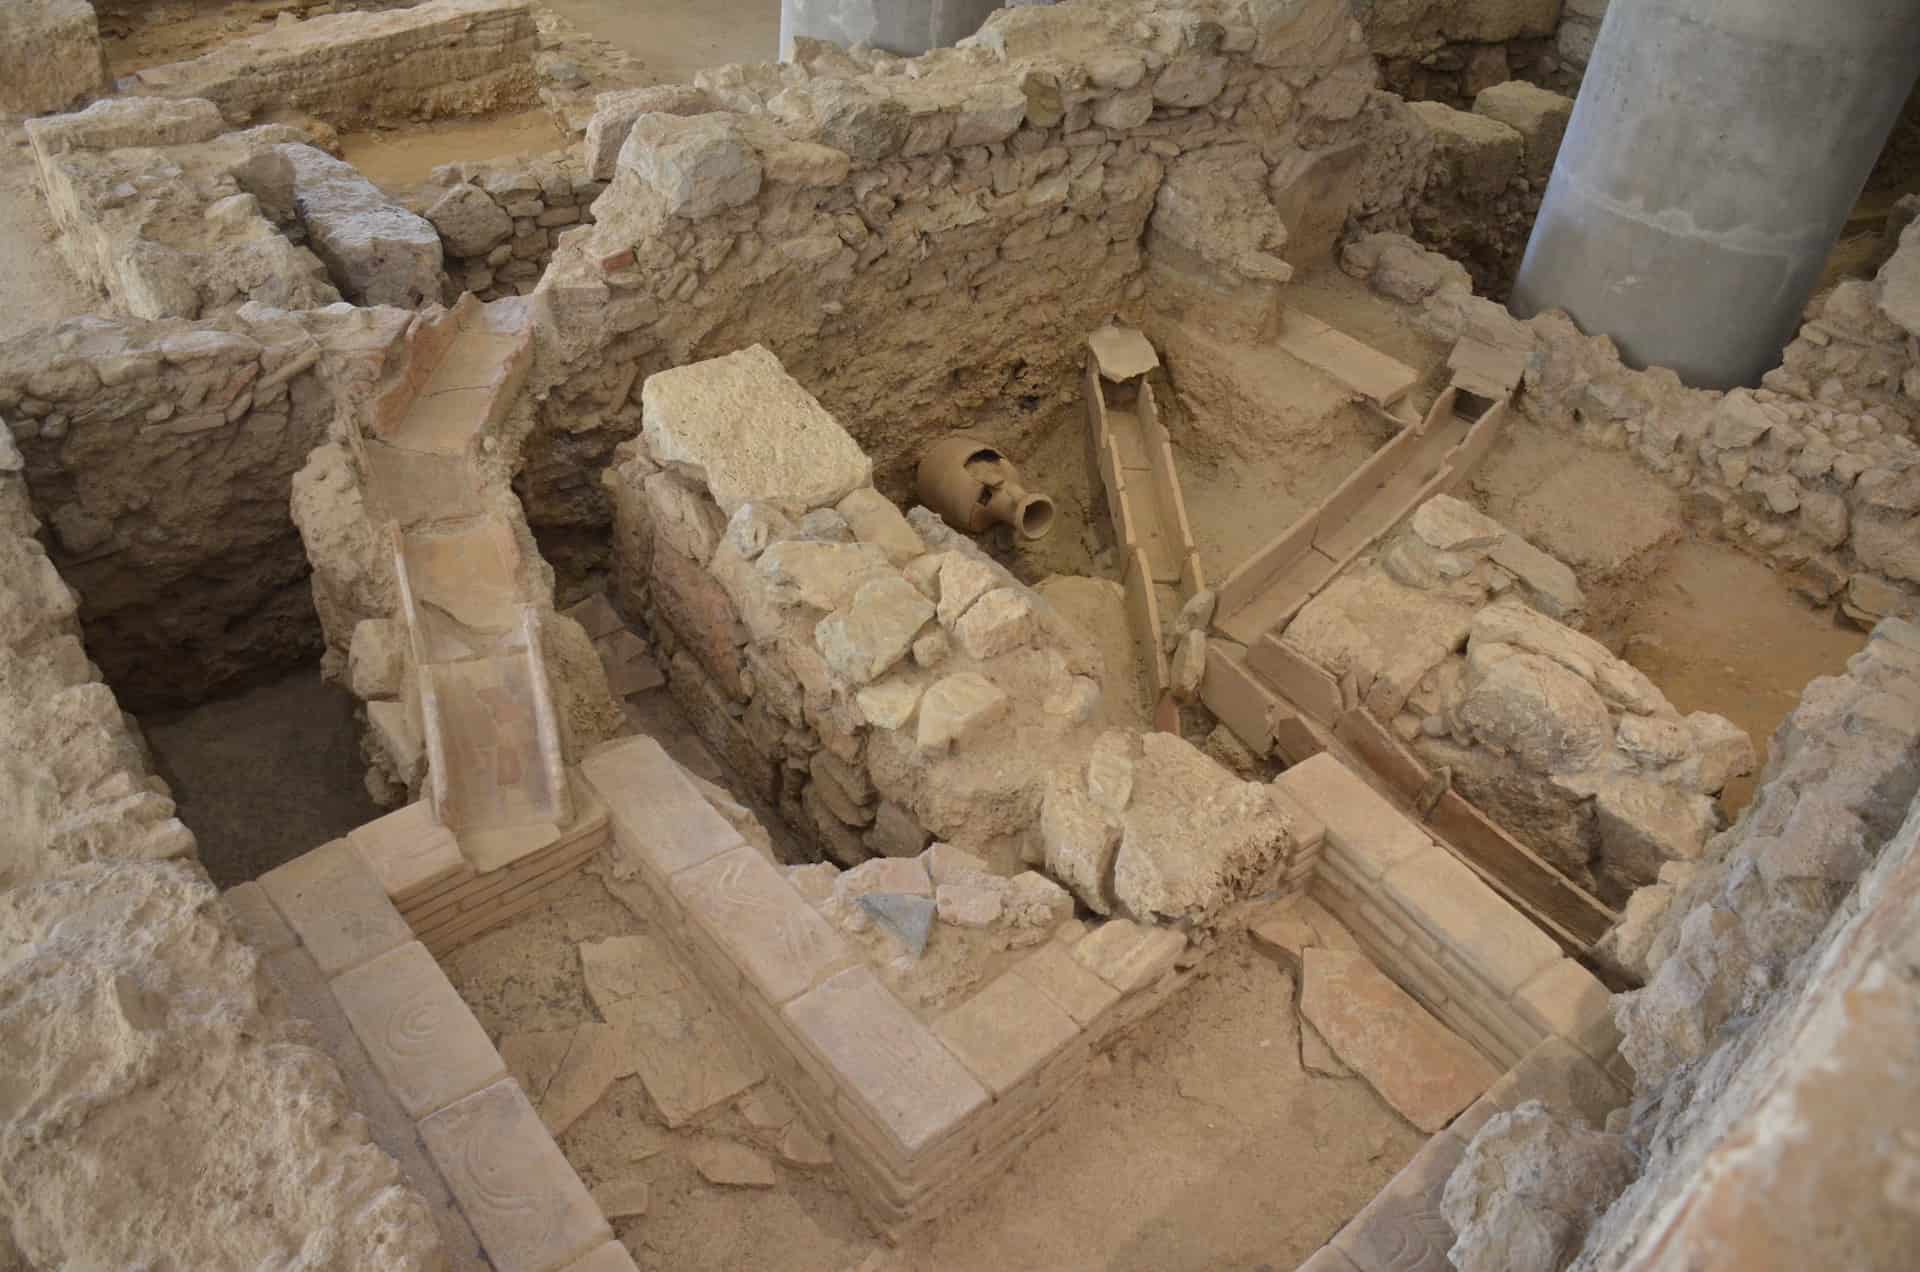 Latrine of House Γ in the archaeological site at the Acropolis Museum in Athens, Greece